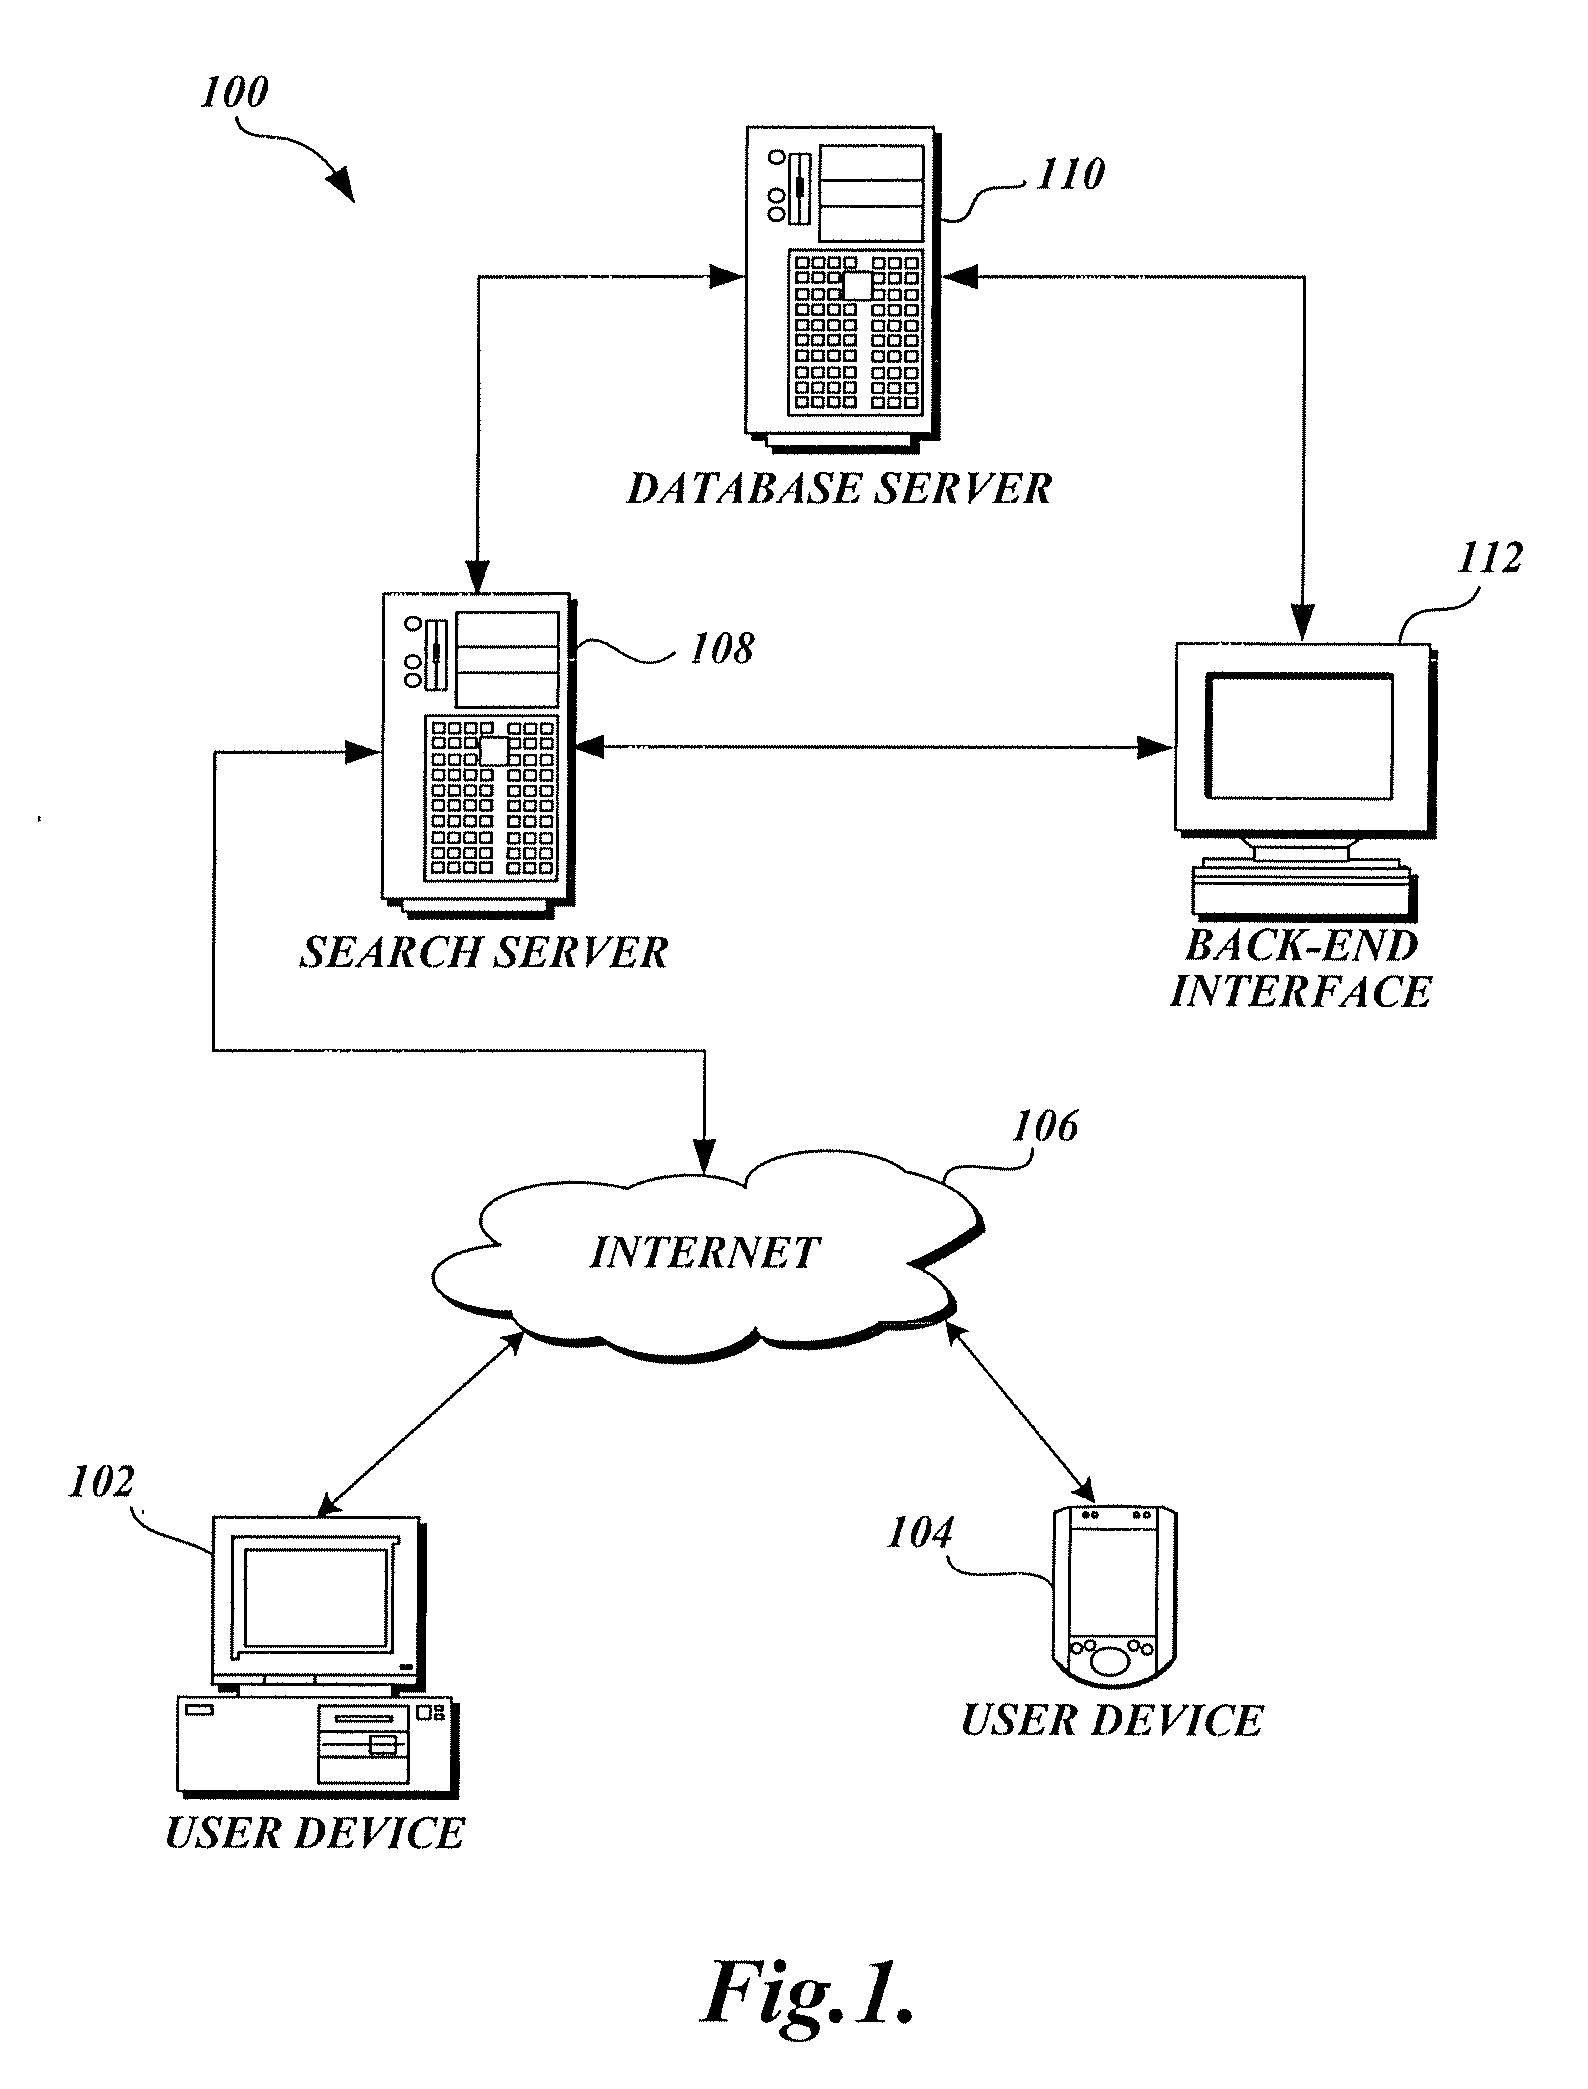 Method and system for access to electronic version of a physical work based on user ownership of the physical work